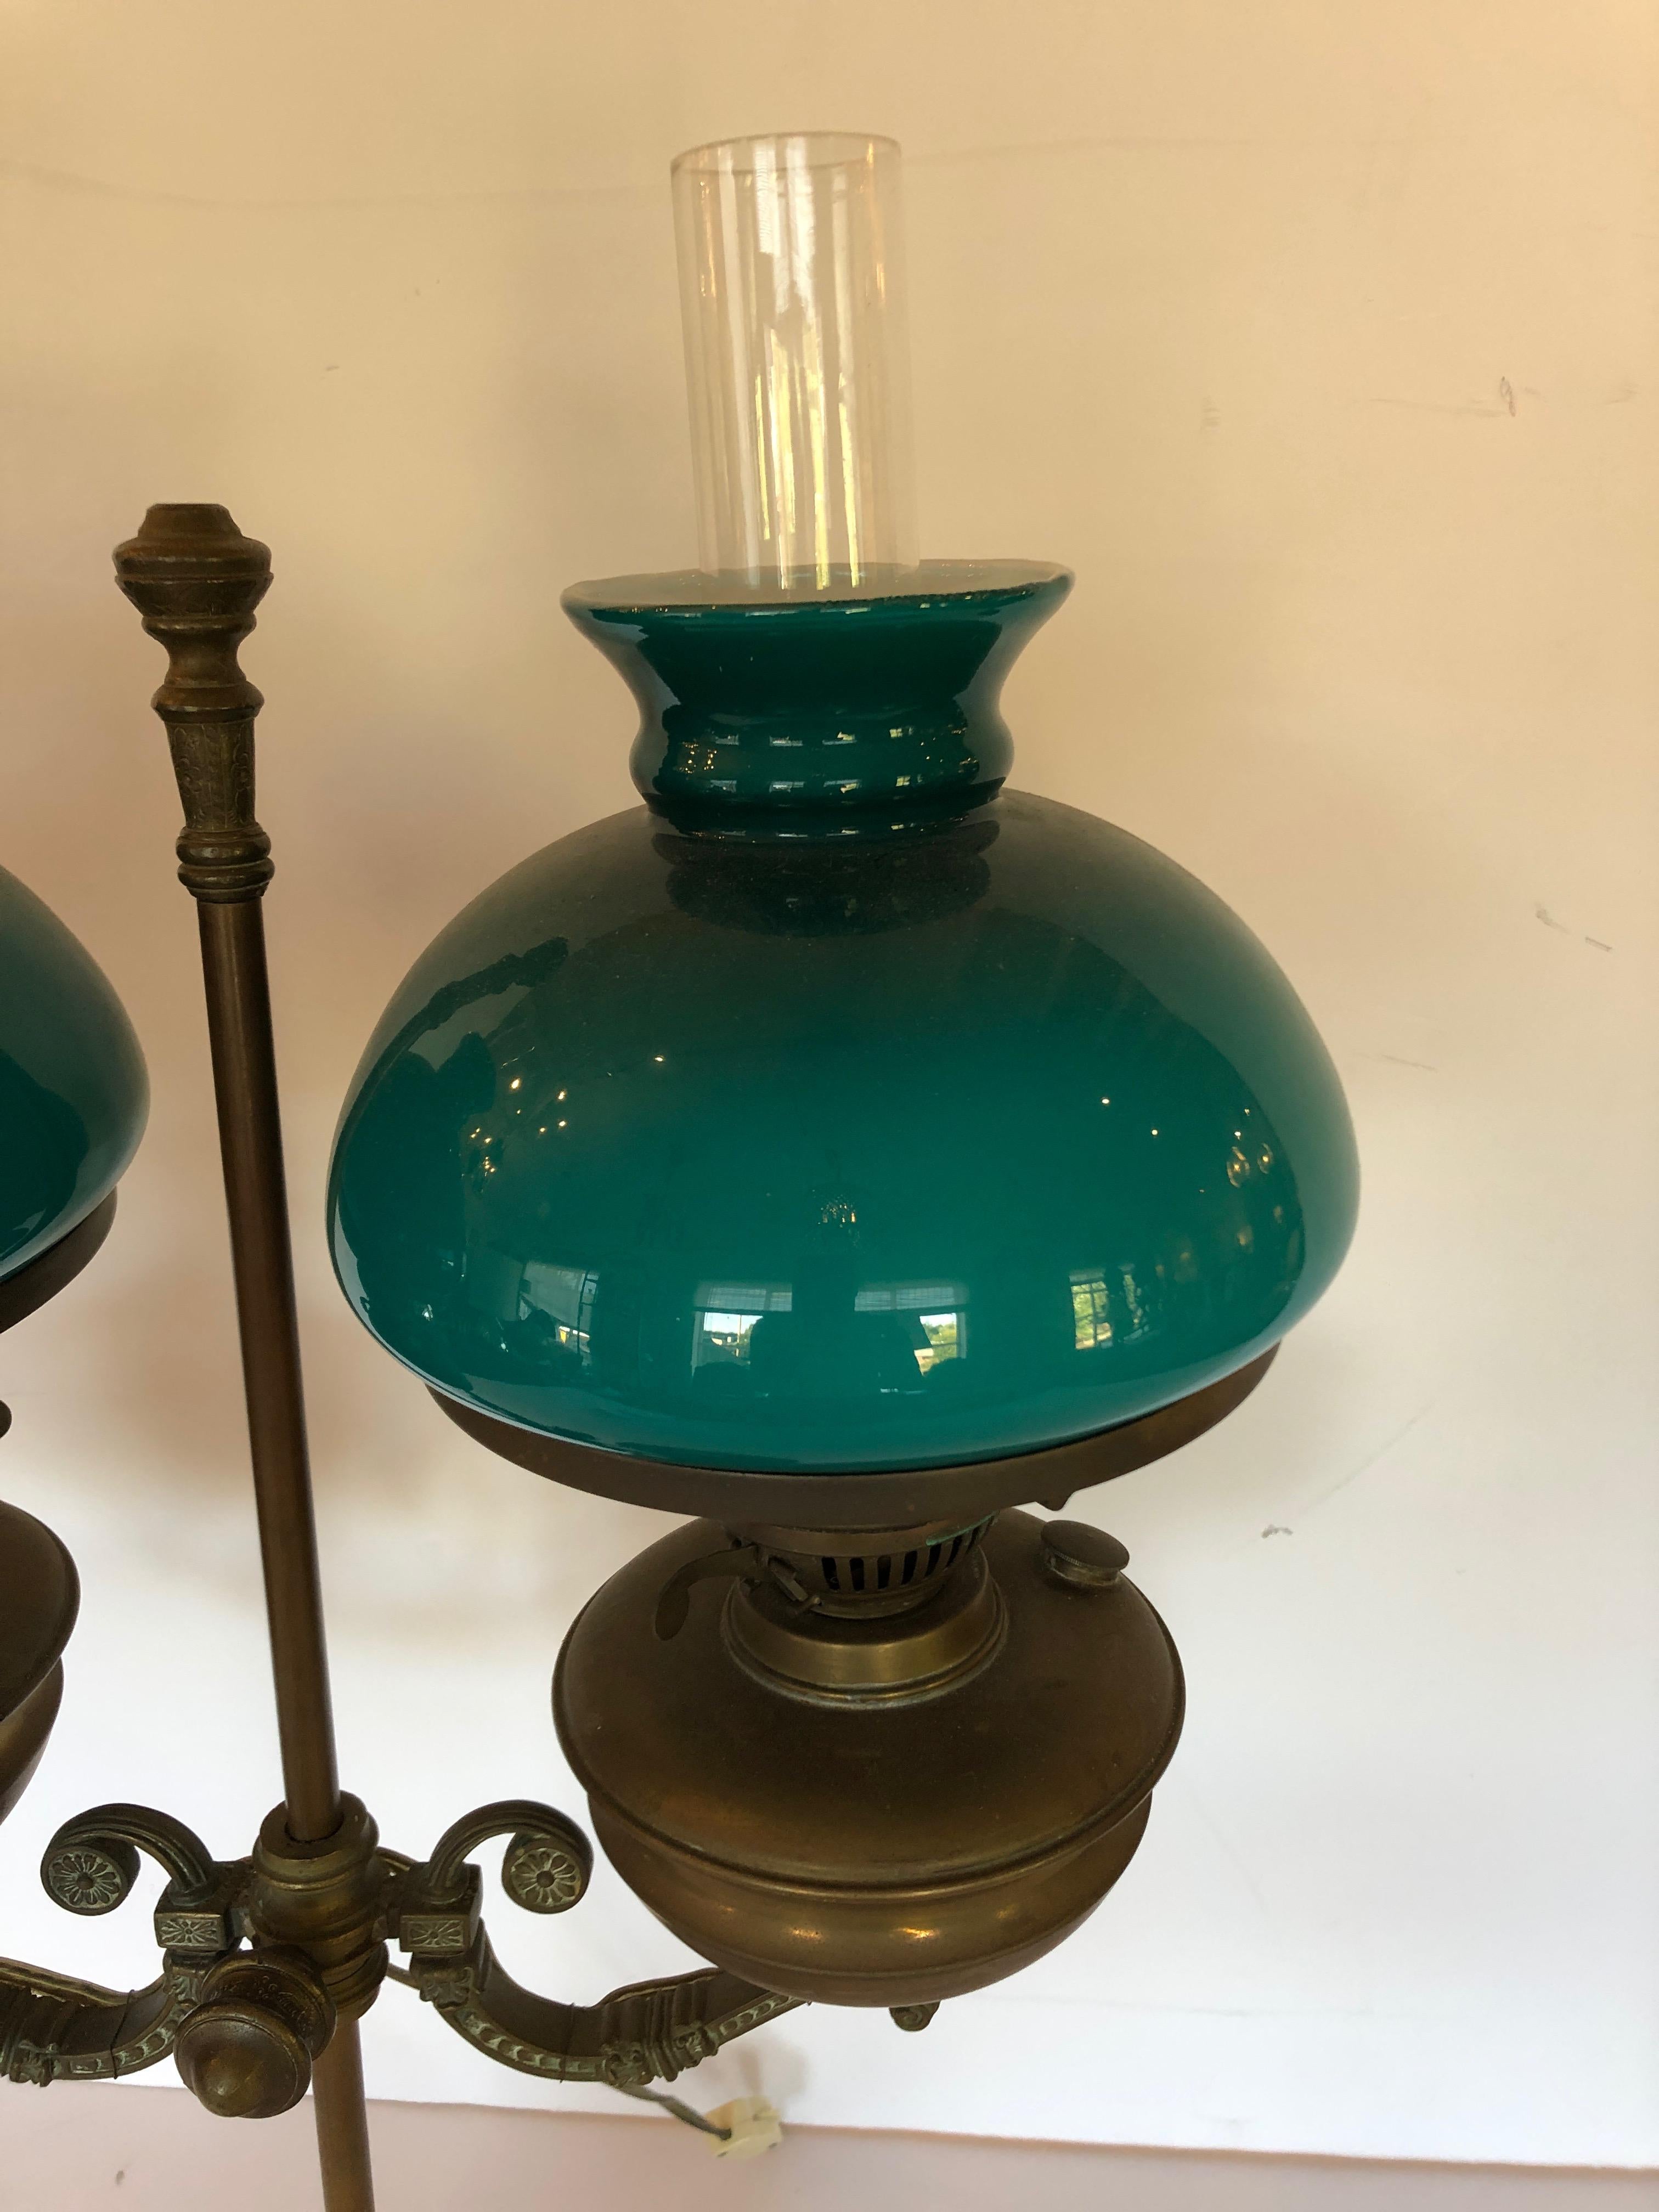 A wonderful antique bronze table or desk lamp that was originally an old oil lamp having double cased green lampshades. Wired and ready.